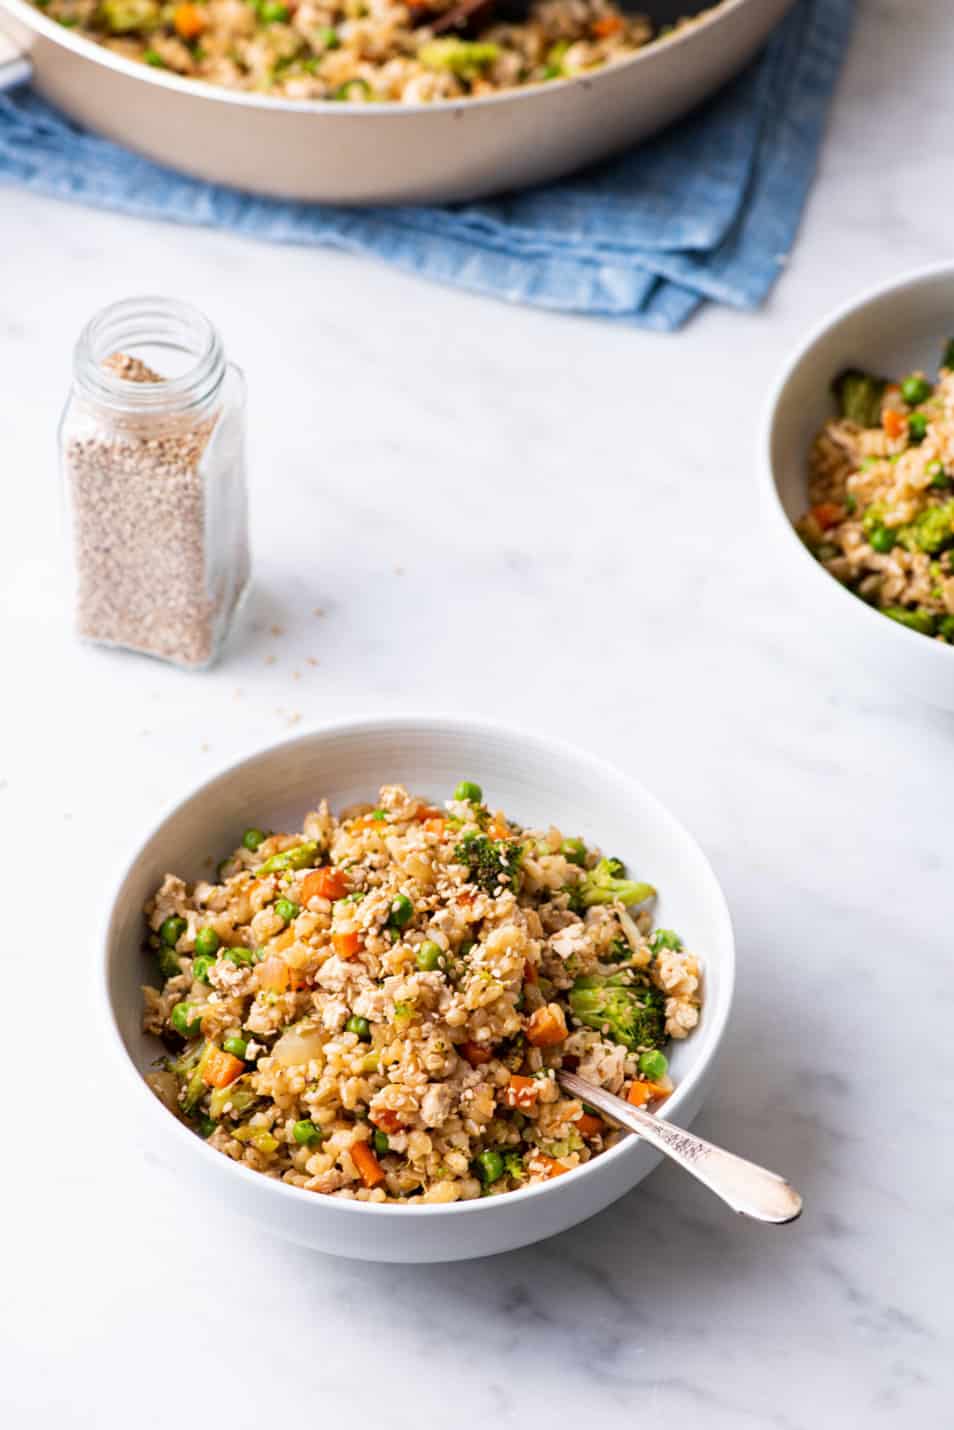 Work-from-home lunch ideas - including veggie fried brown rice with tofu